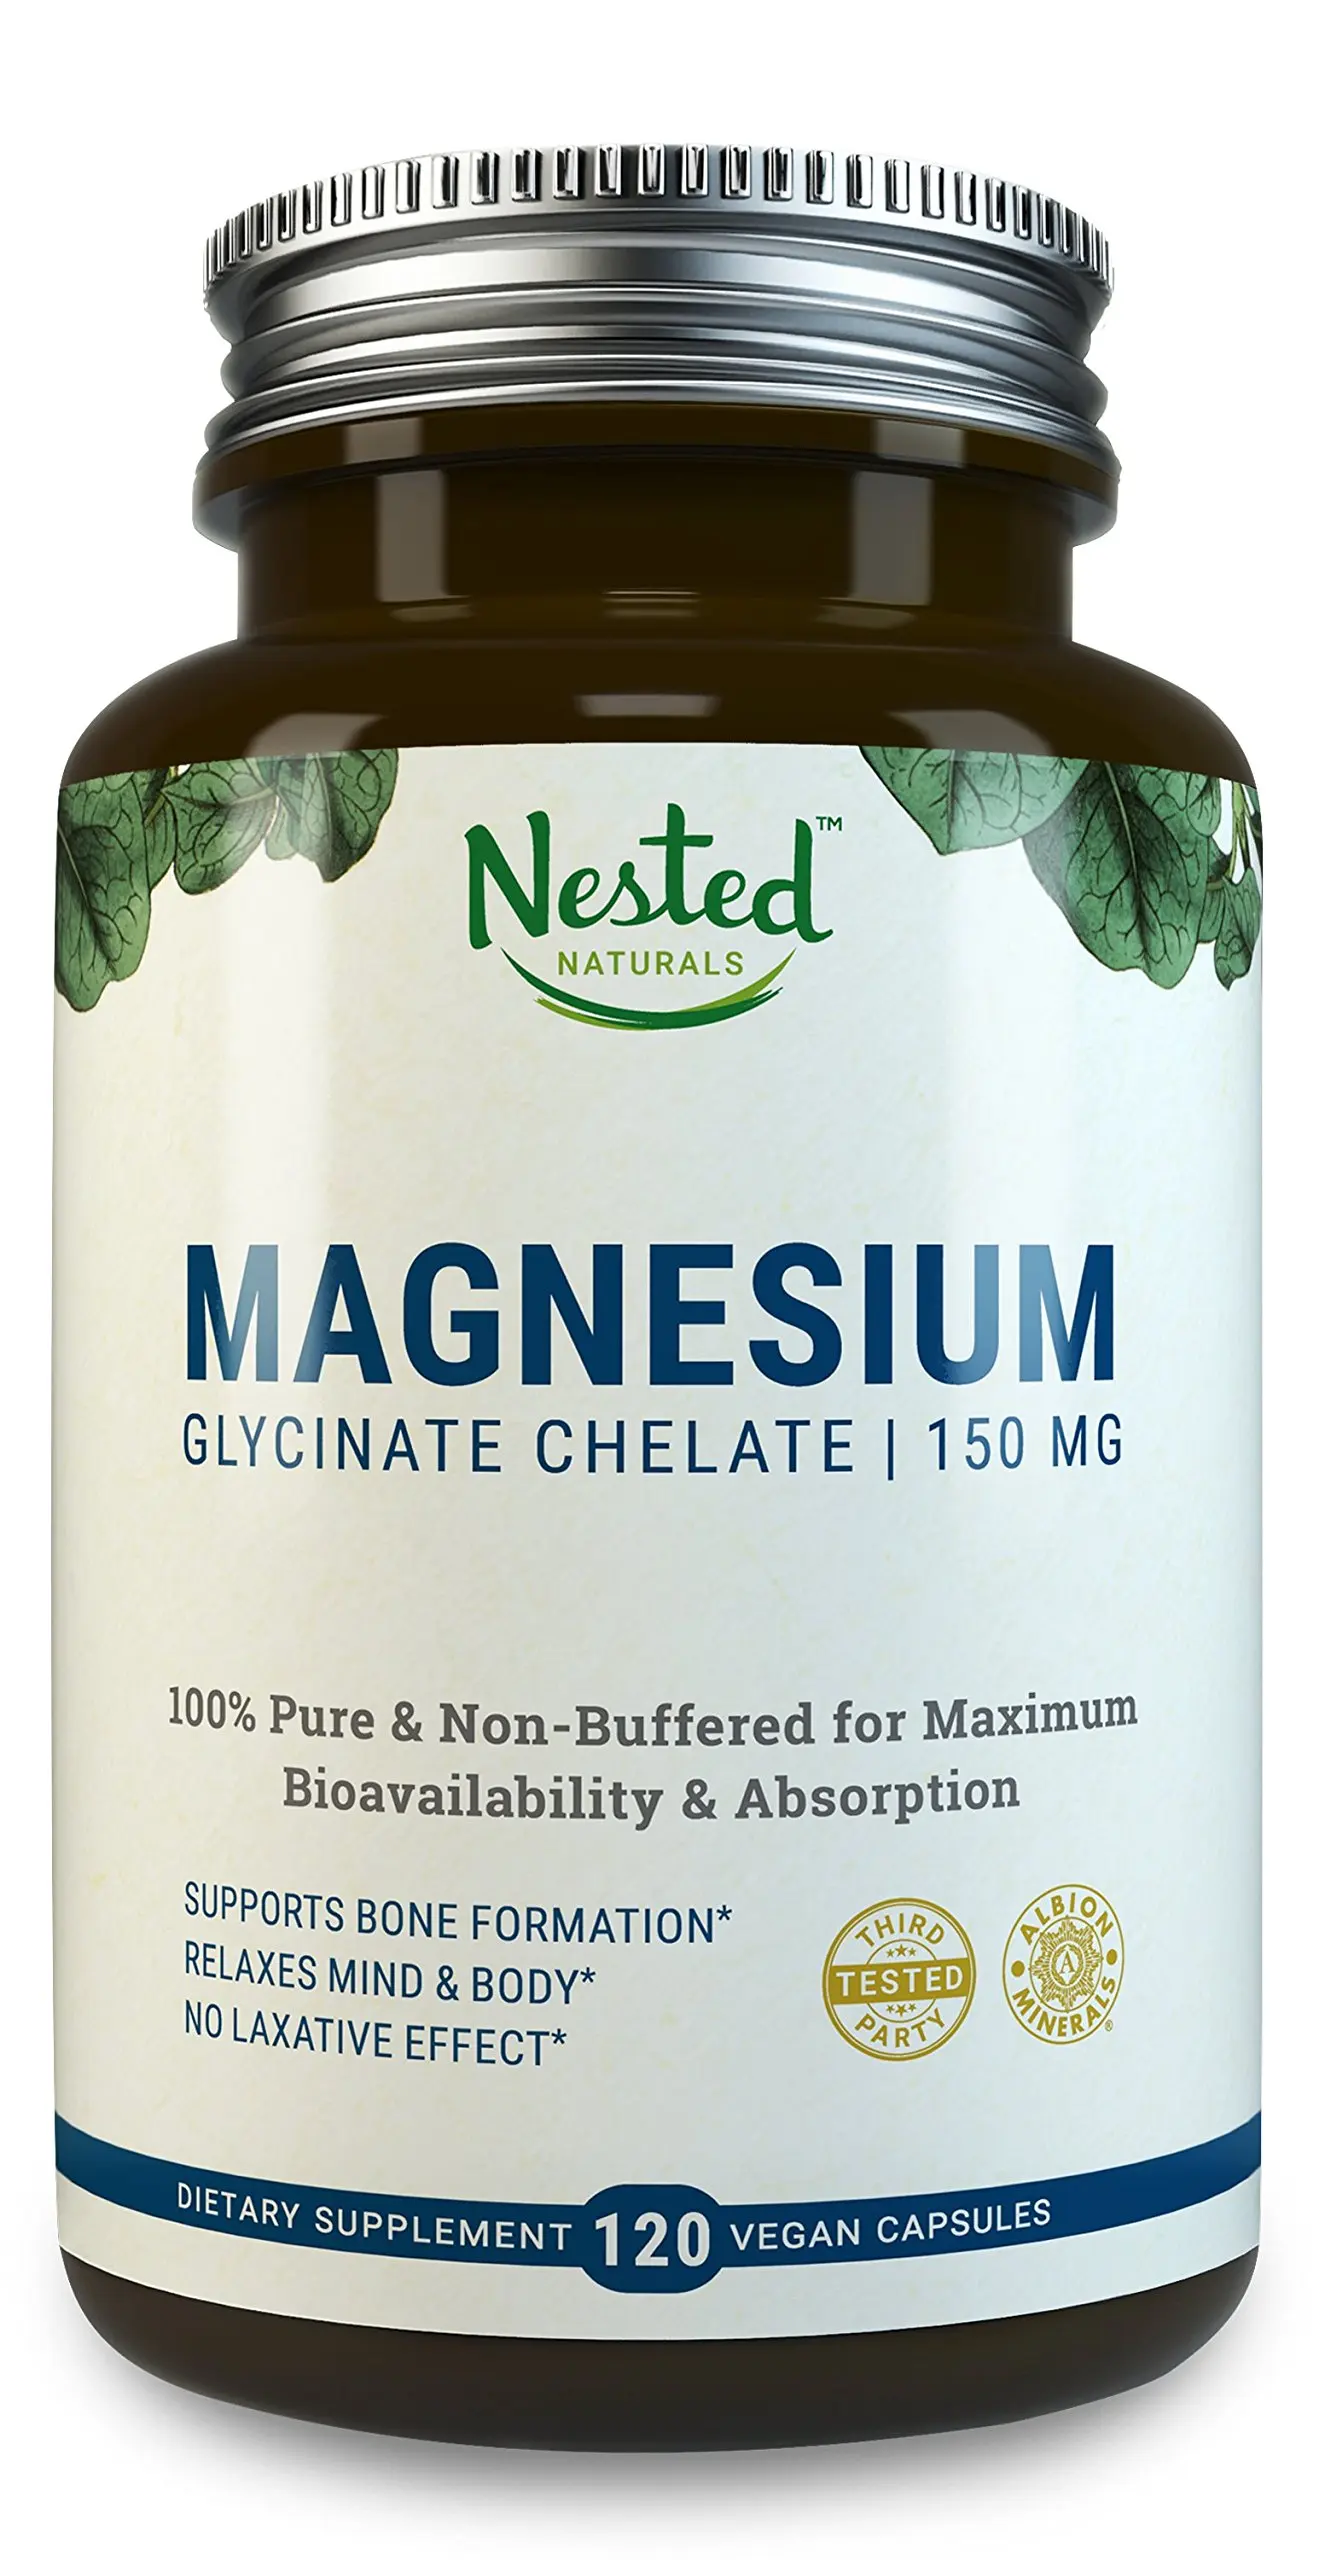 19.95. MAGNESIUM GLYCINATE CHELATE 150mg 120 High Absorption & Bioavail...